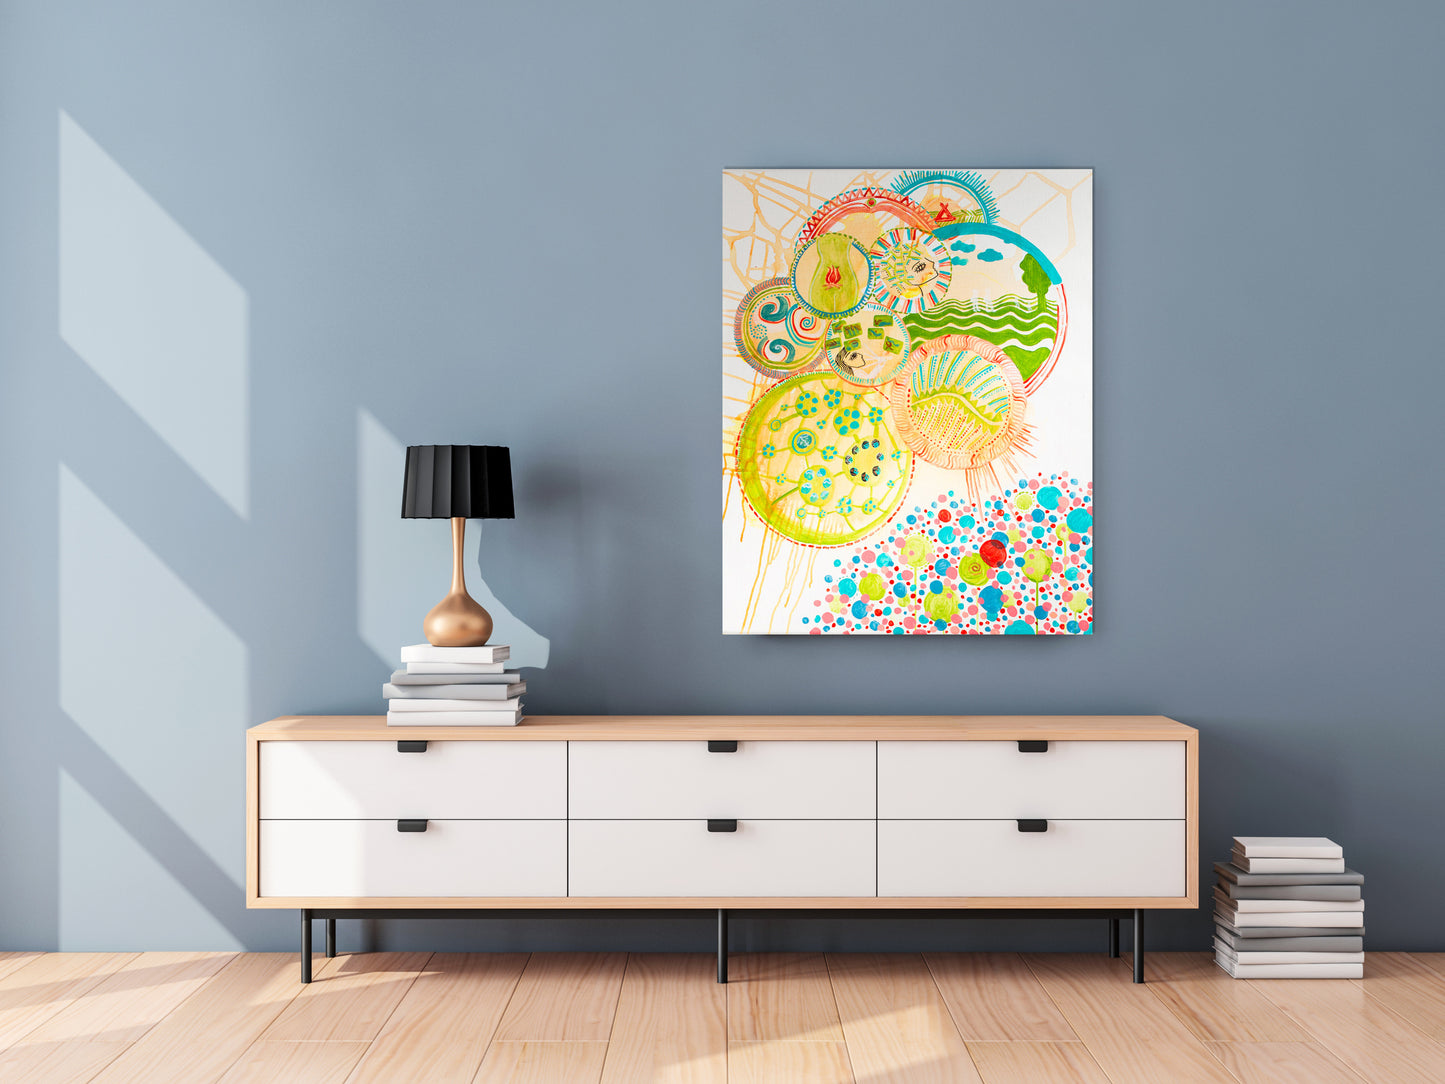 Mapping a dream - Original large painting